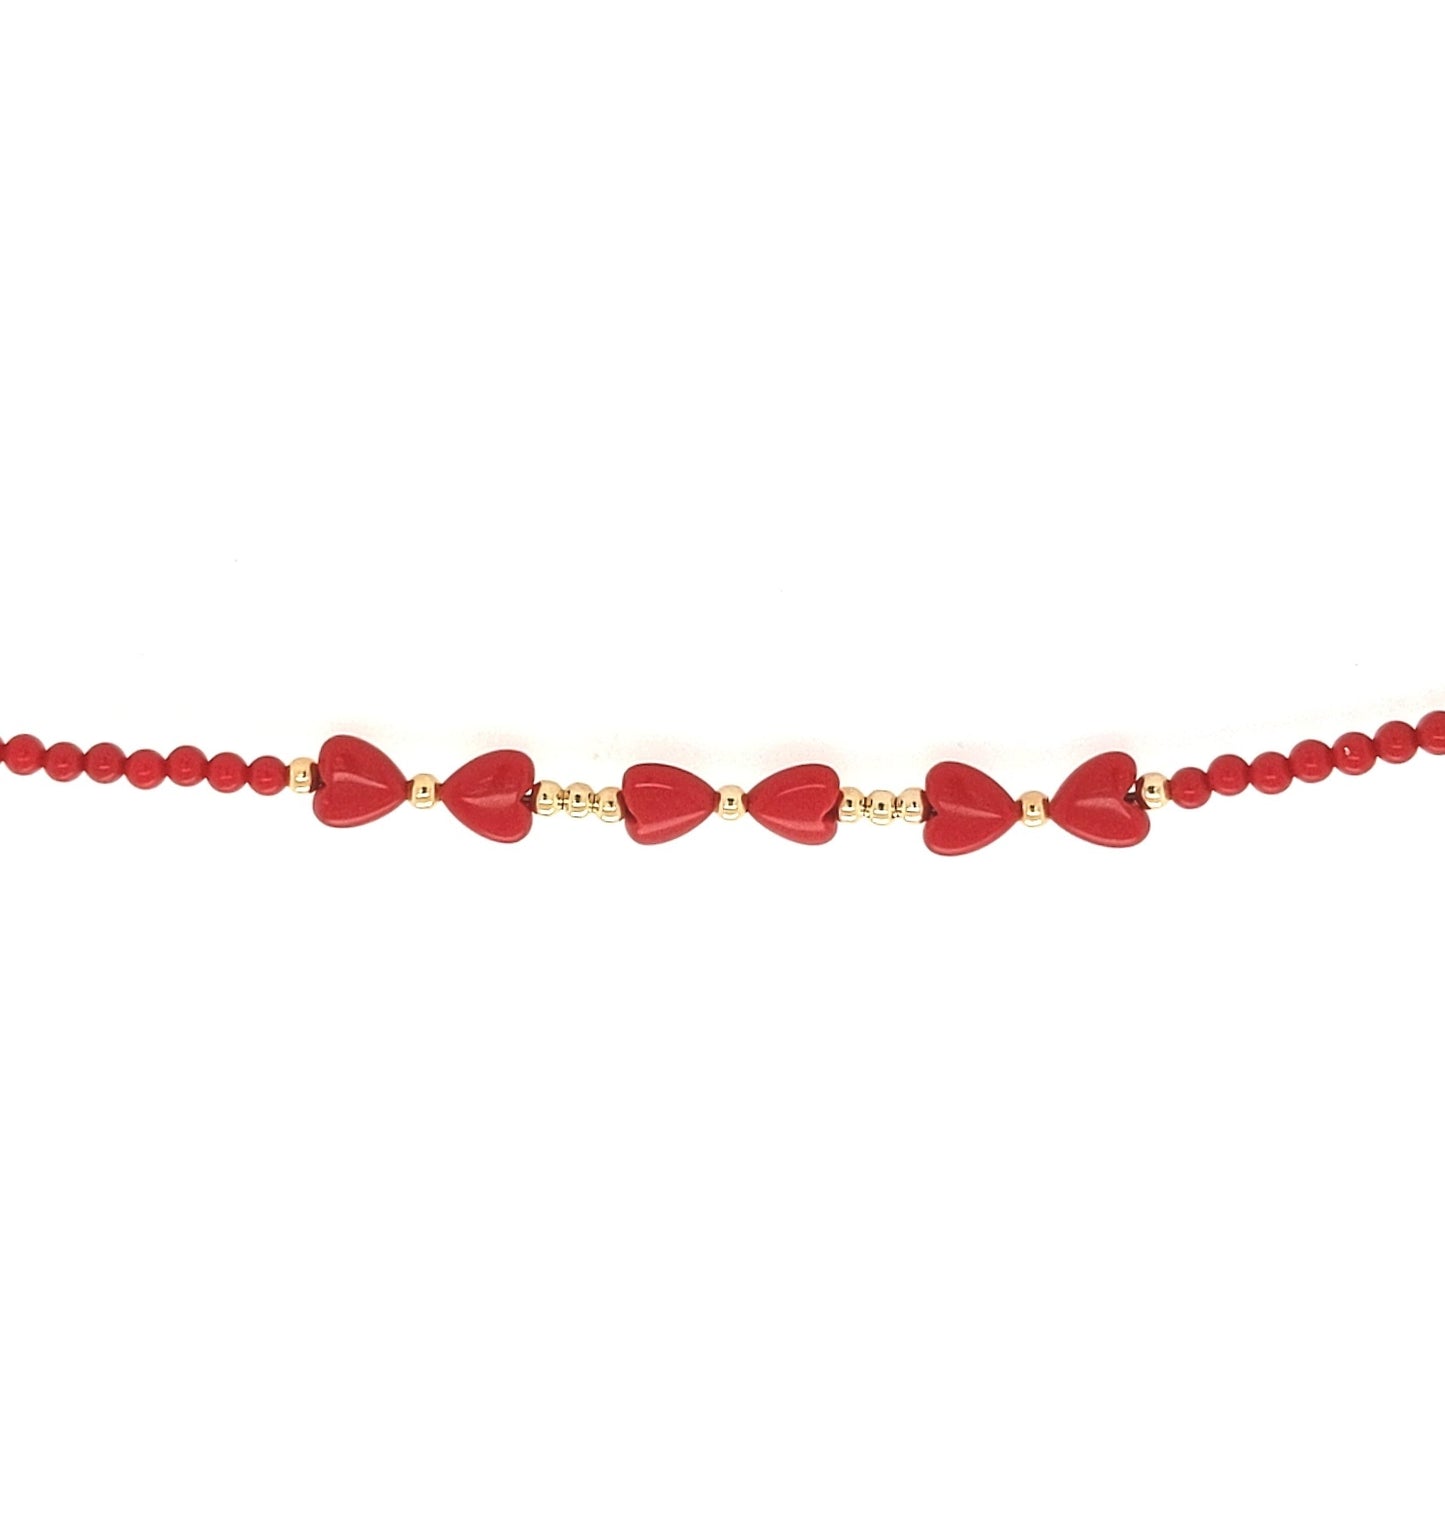 Small Red Beads With 6 Red Hearts in the Center Children's Bracelet - HK Jewels